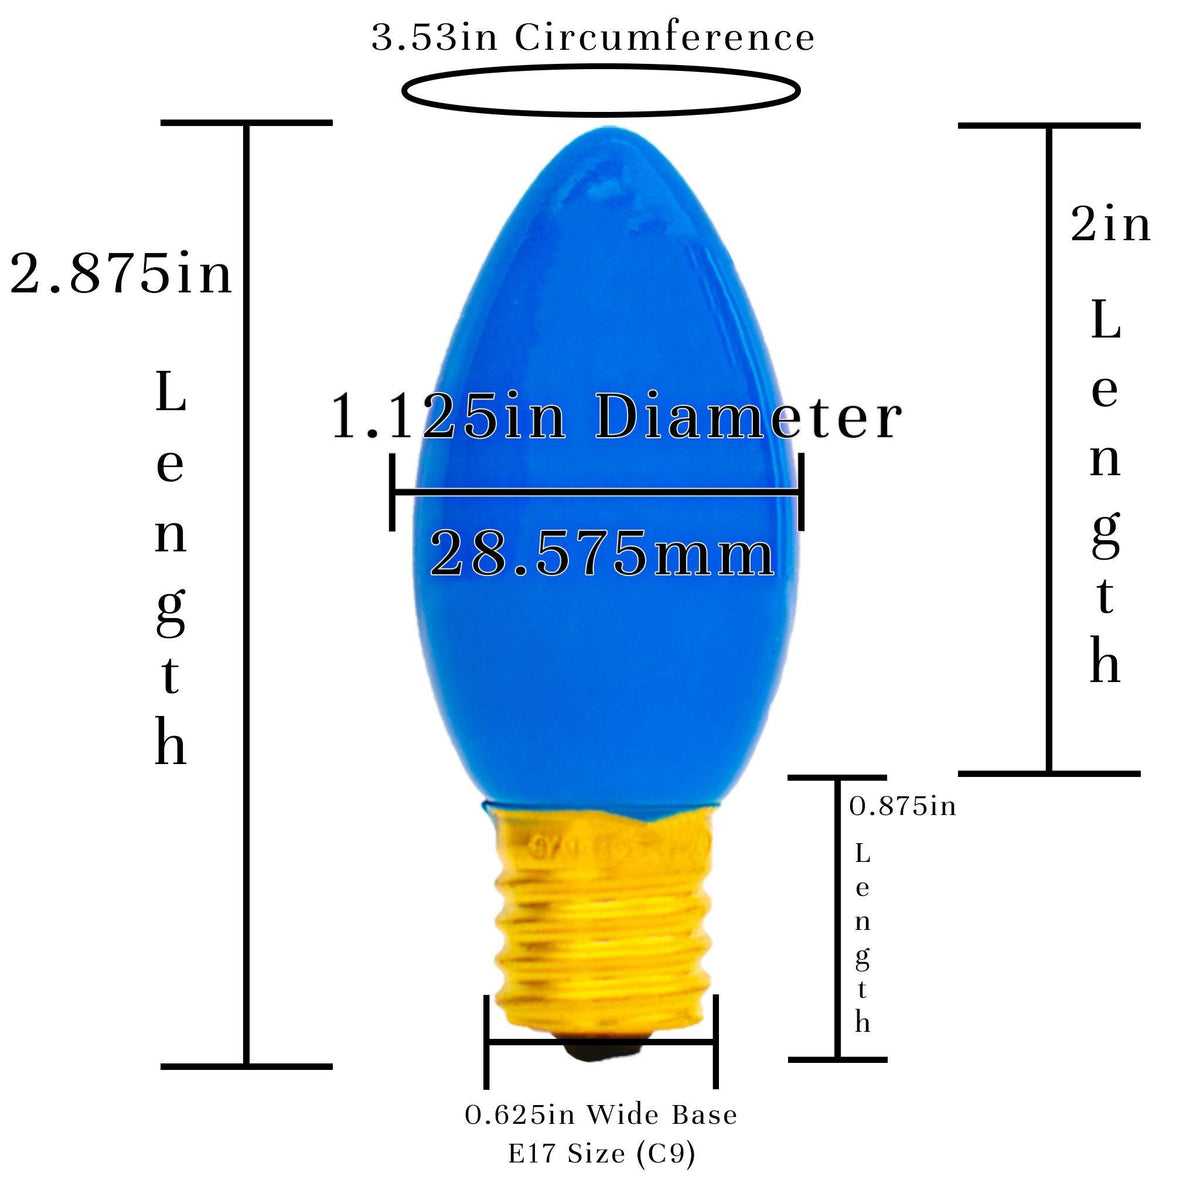 C-7 & C-9 Solid Ceramic Blue Christmas Light Bulbs. Replace your old bulbs with a set of brand new Candelabra Lights. Shop now at leedisplay.com